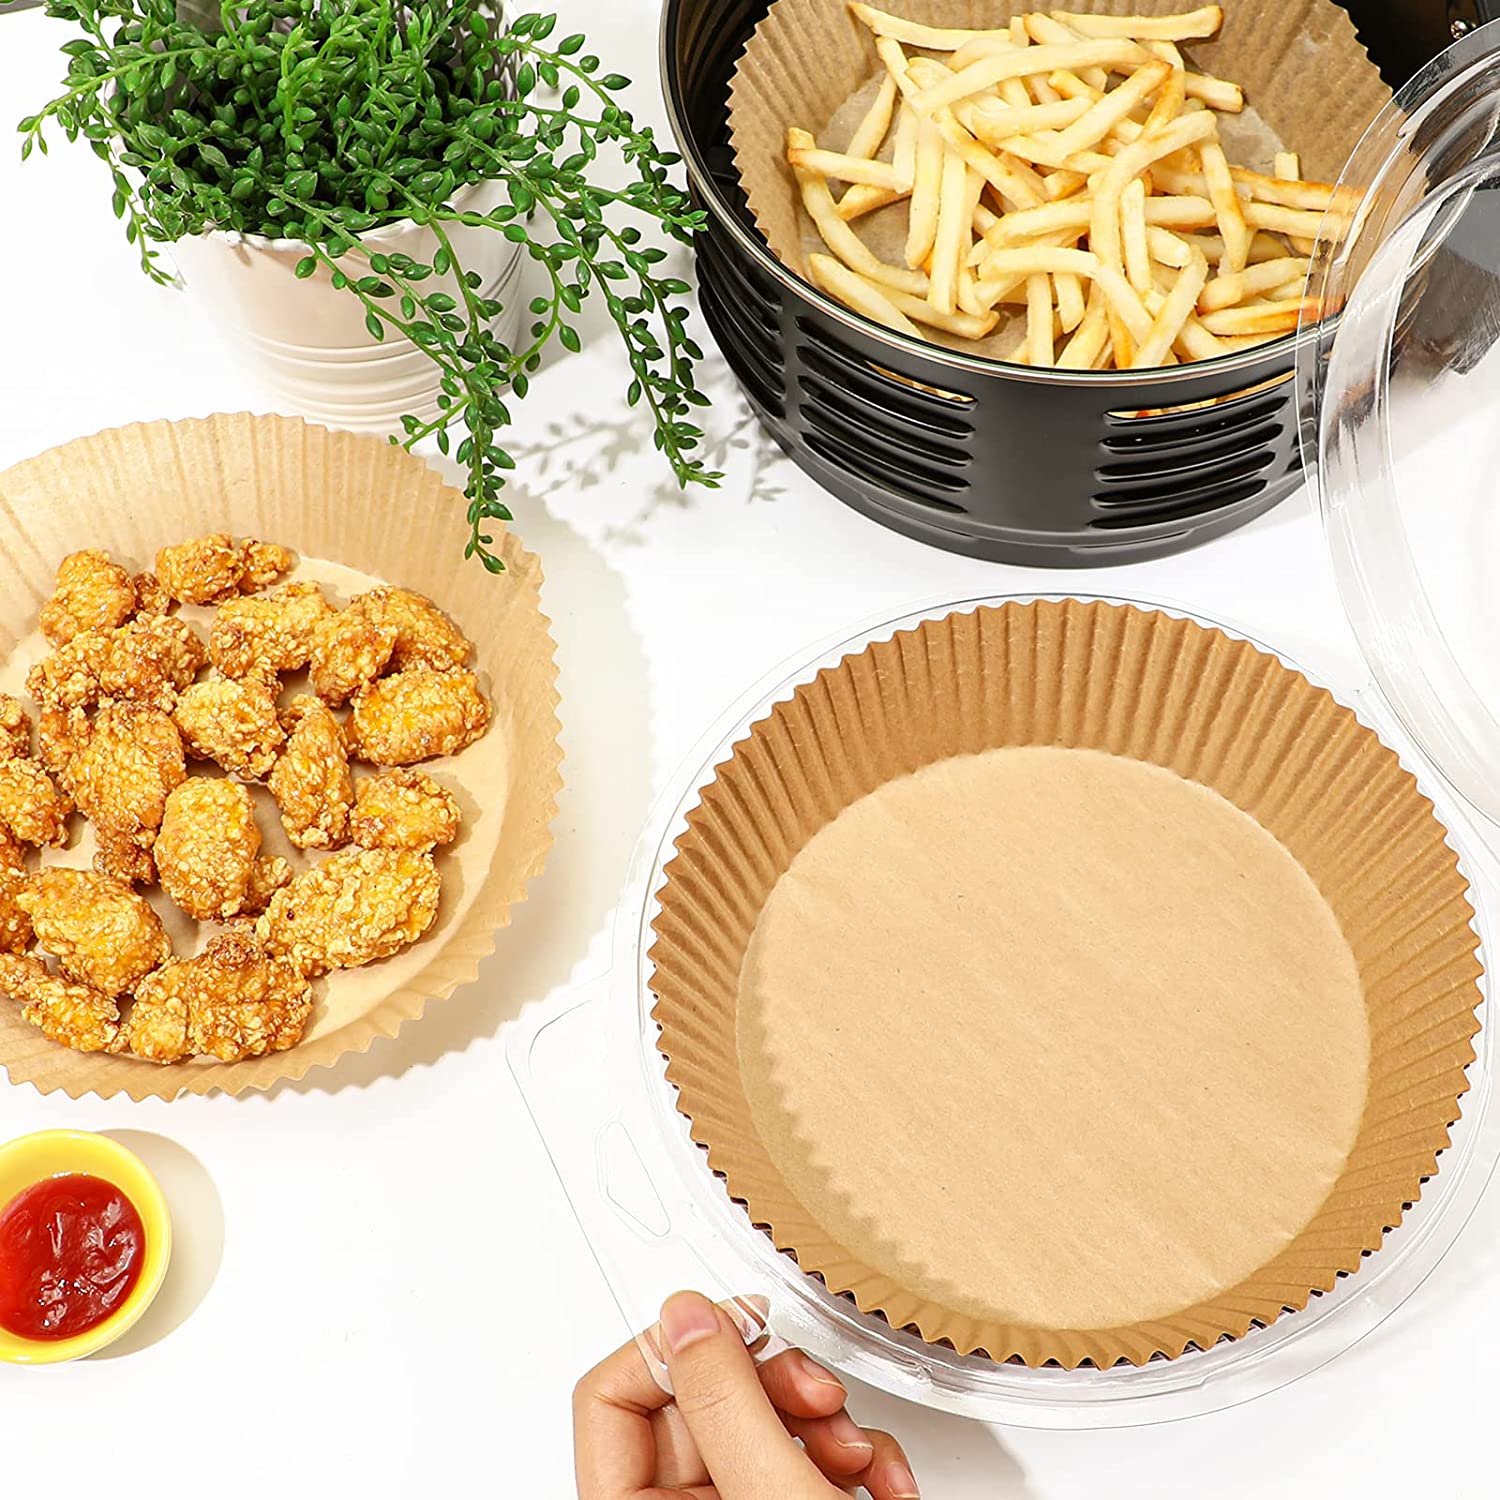 50pcs/pack Air Fryer Accessories, Silicone Oil Cup & Non-stick Paper Pad &  Round Paper Liners For Baking